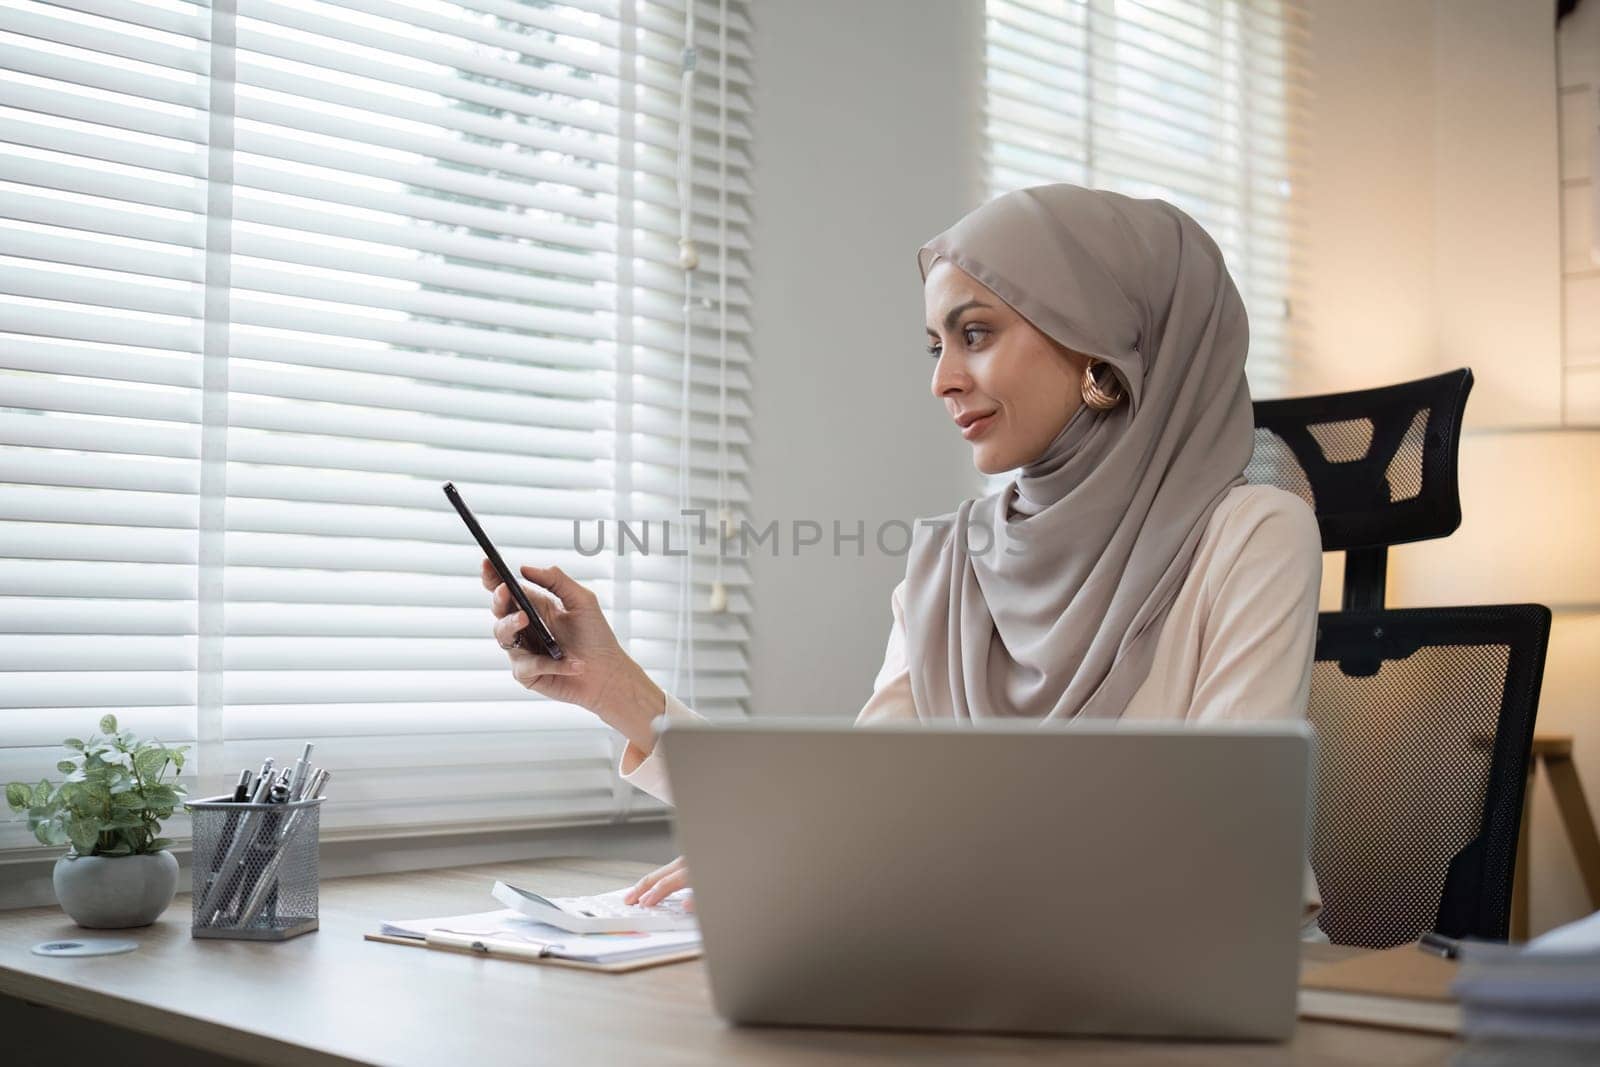 Muslim woman using smartphone at office desk. Professional workspace, casual attire by nateemee